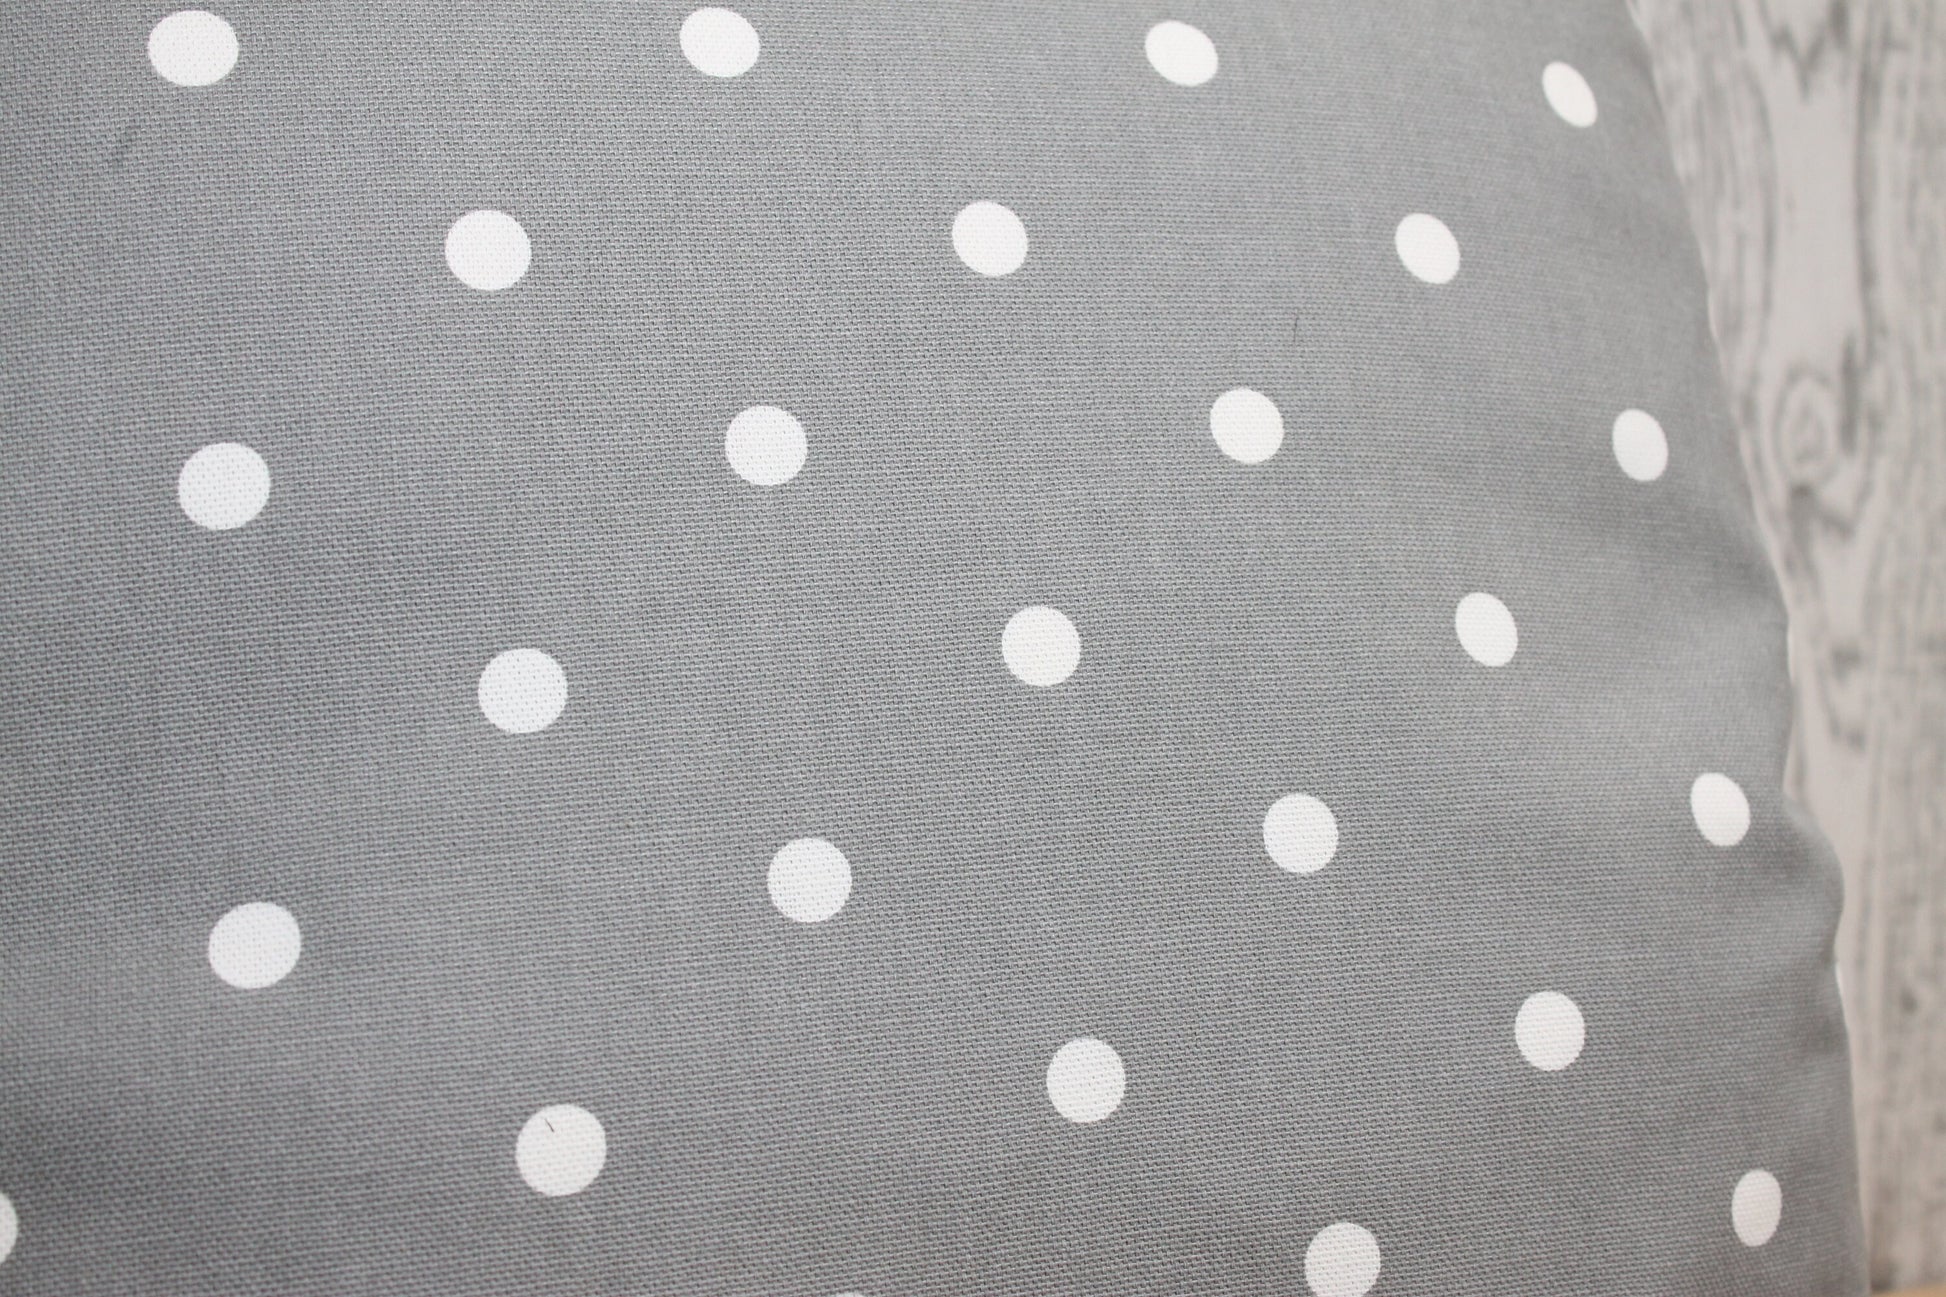 Grey Dotty Cushion 16" square cushion-Polka Dot Cushion -Shabby Chic-cottage chic-Decorative pillow - Scatter pillow- double sided